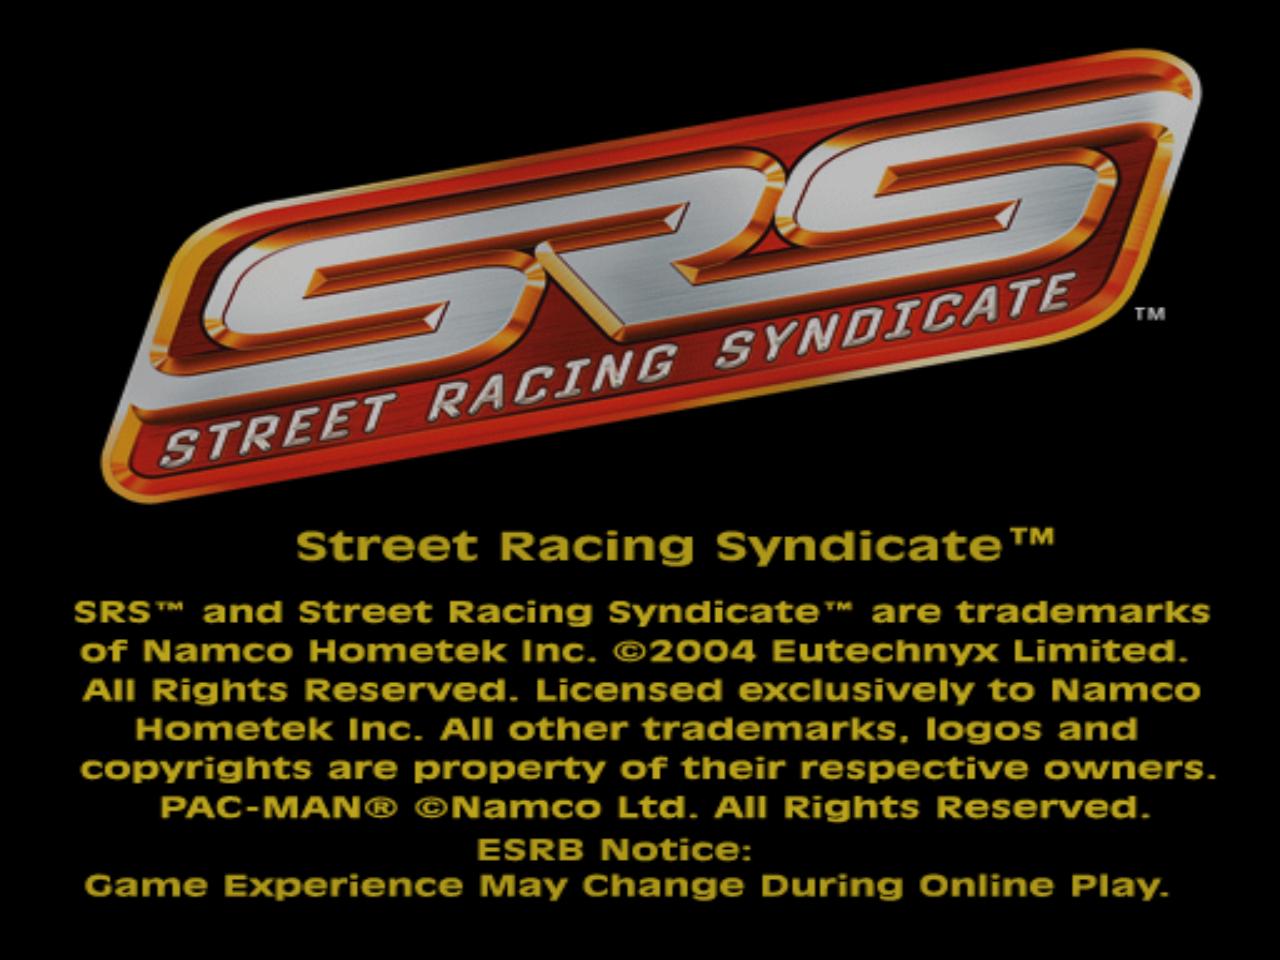 srs street racing syndicate youngest